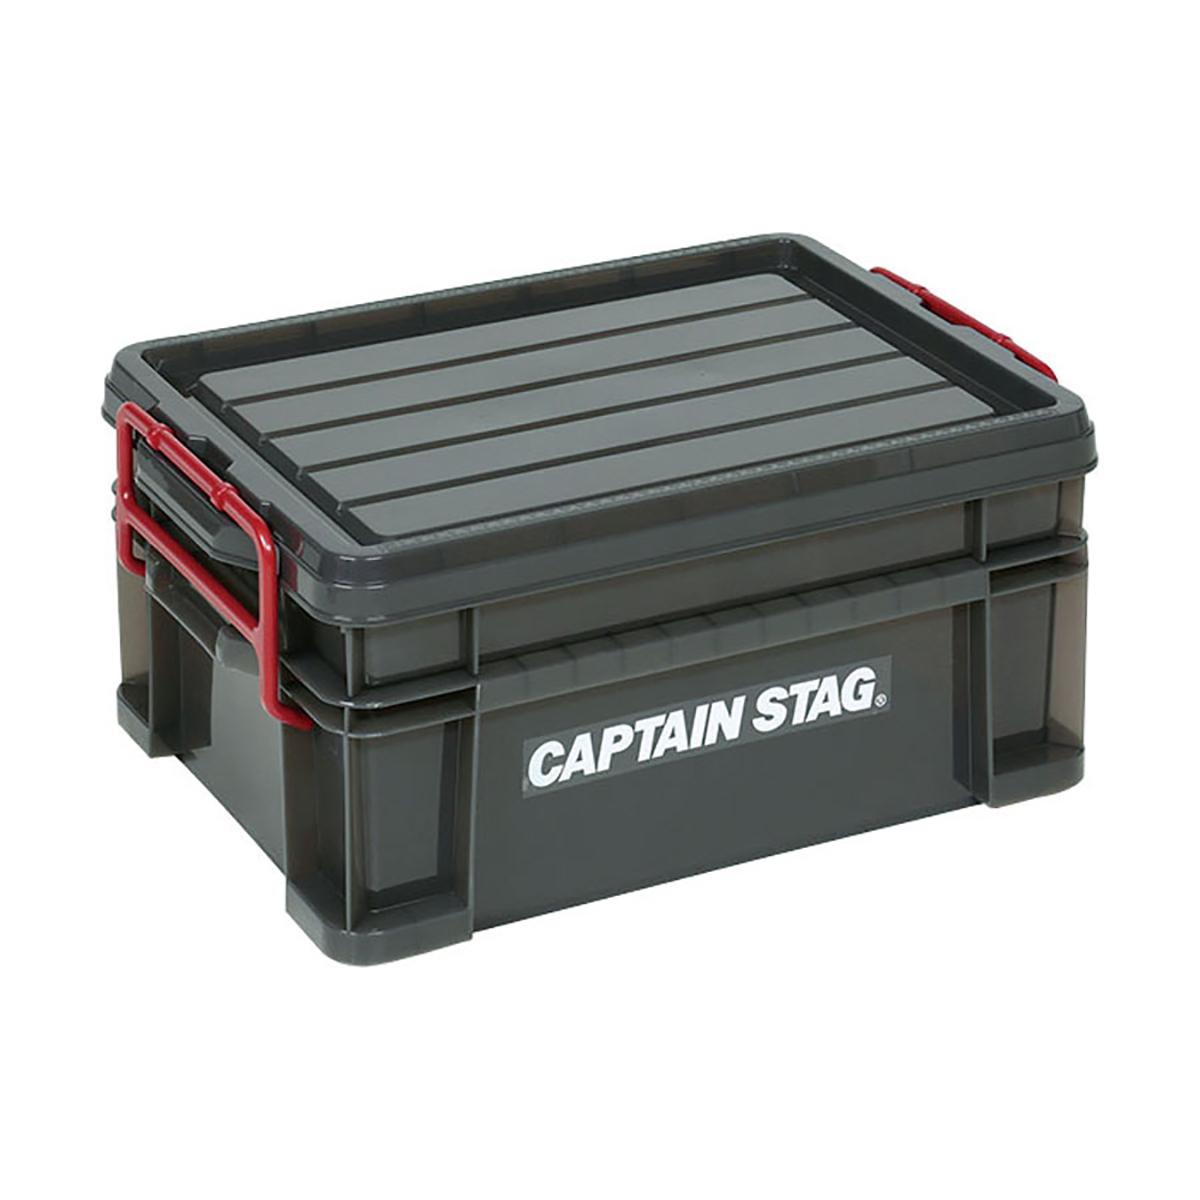 CAPTAIN STAG OUTDOOR TOOLBOX L